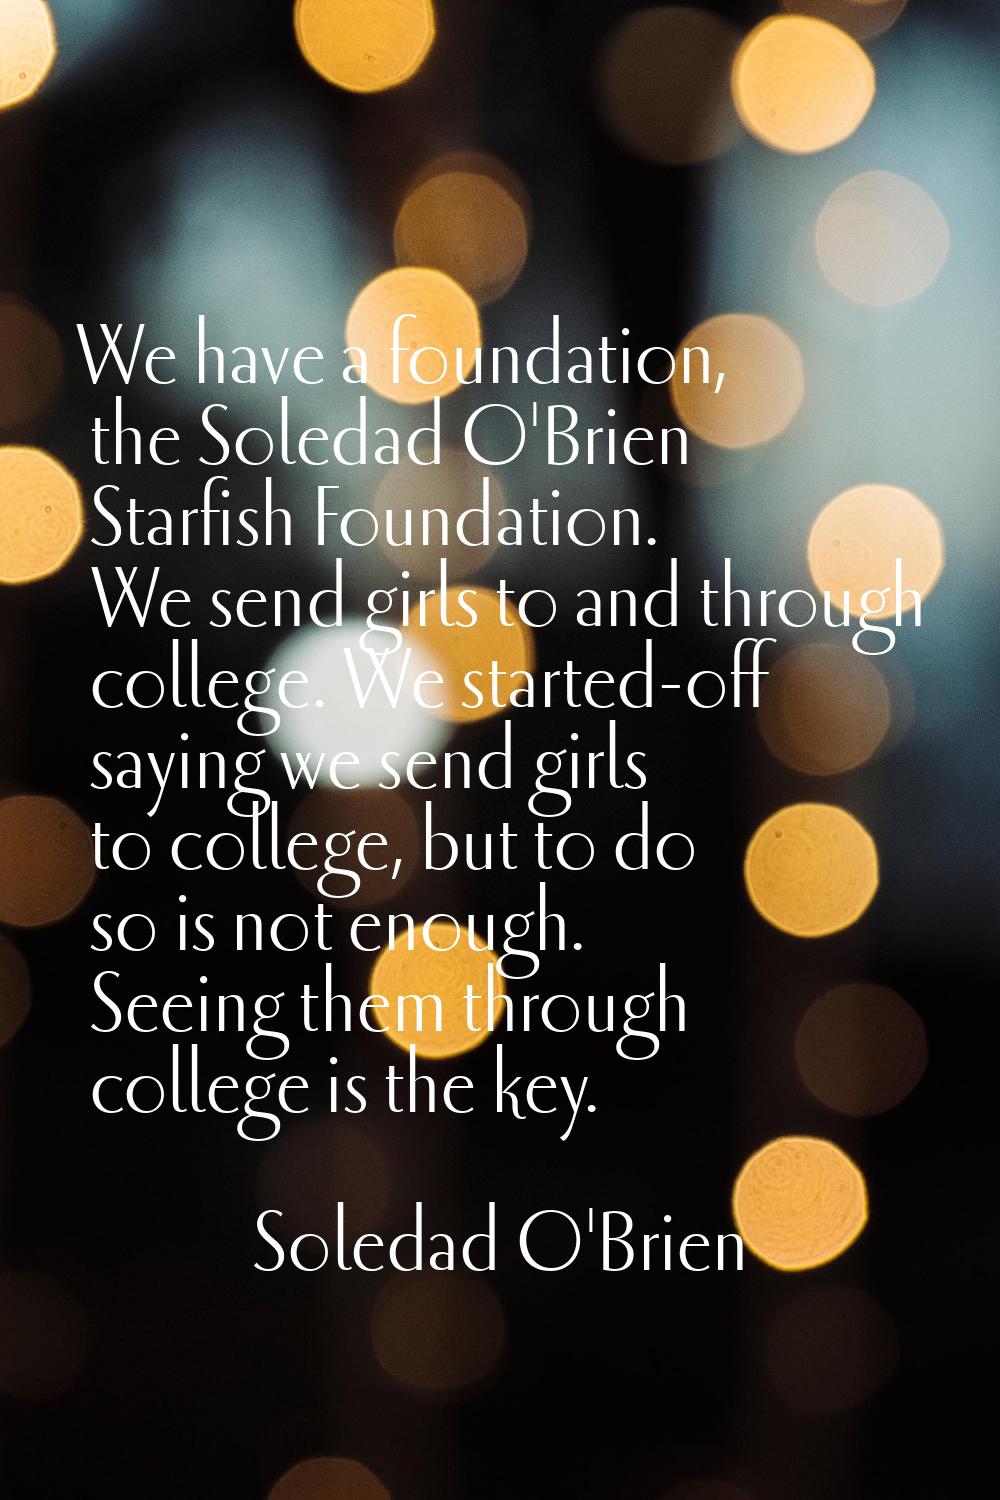 We have a foundation, the Soledad O'Brien Starfish Foundation. We send girls to and through college